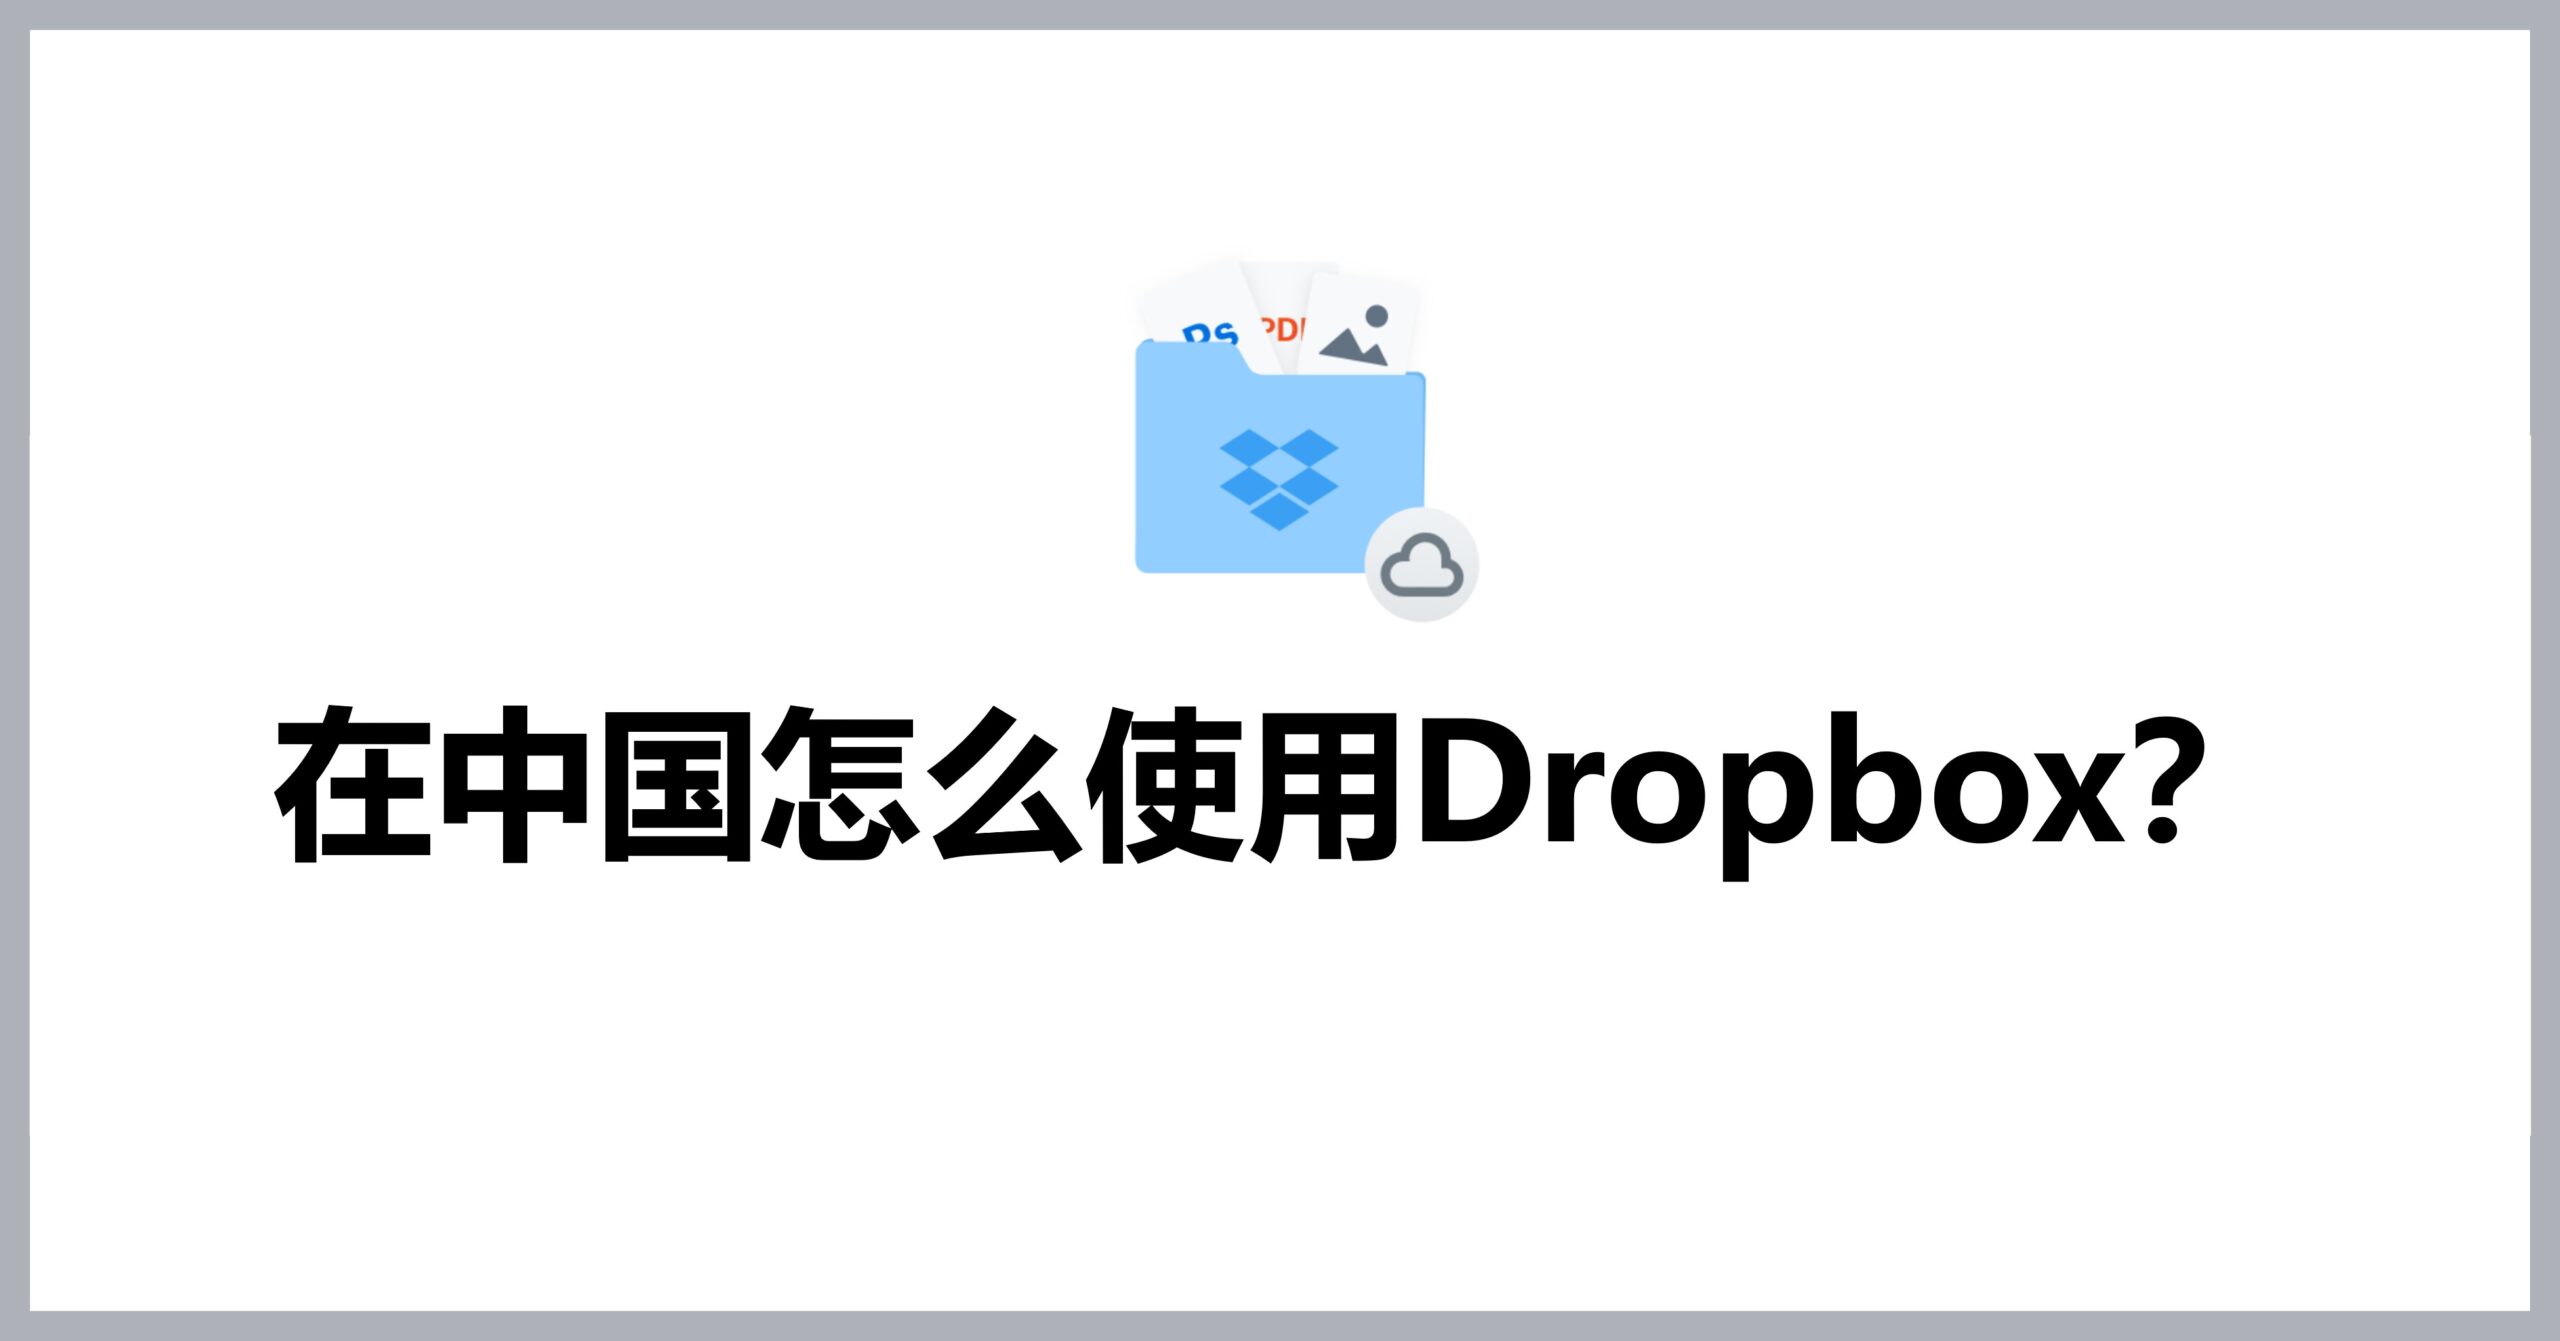 How to use Dropbox in China